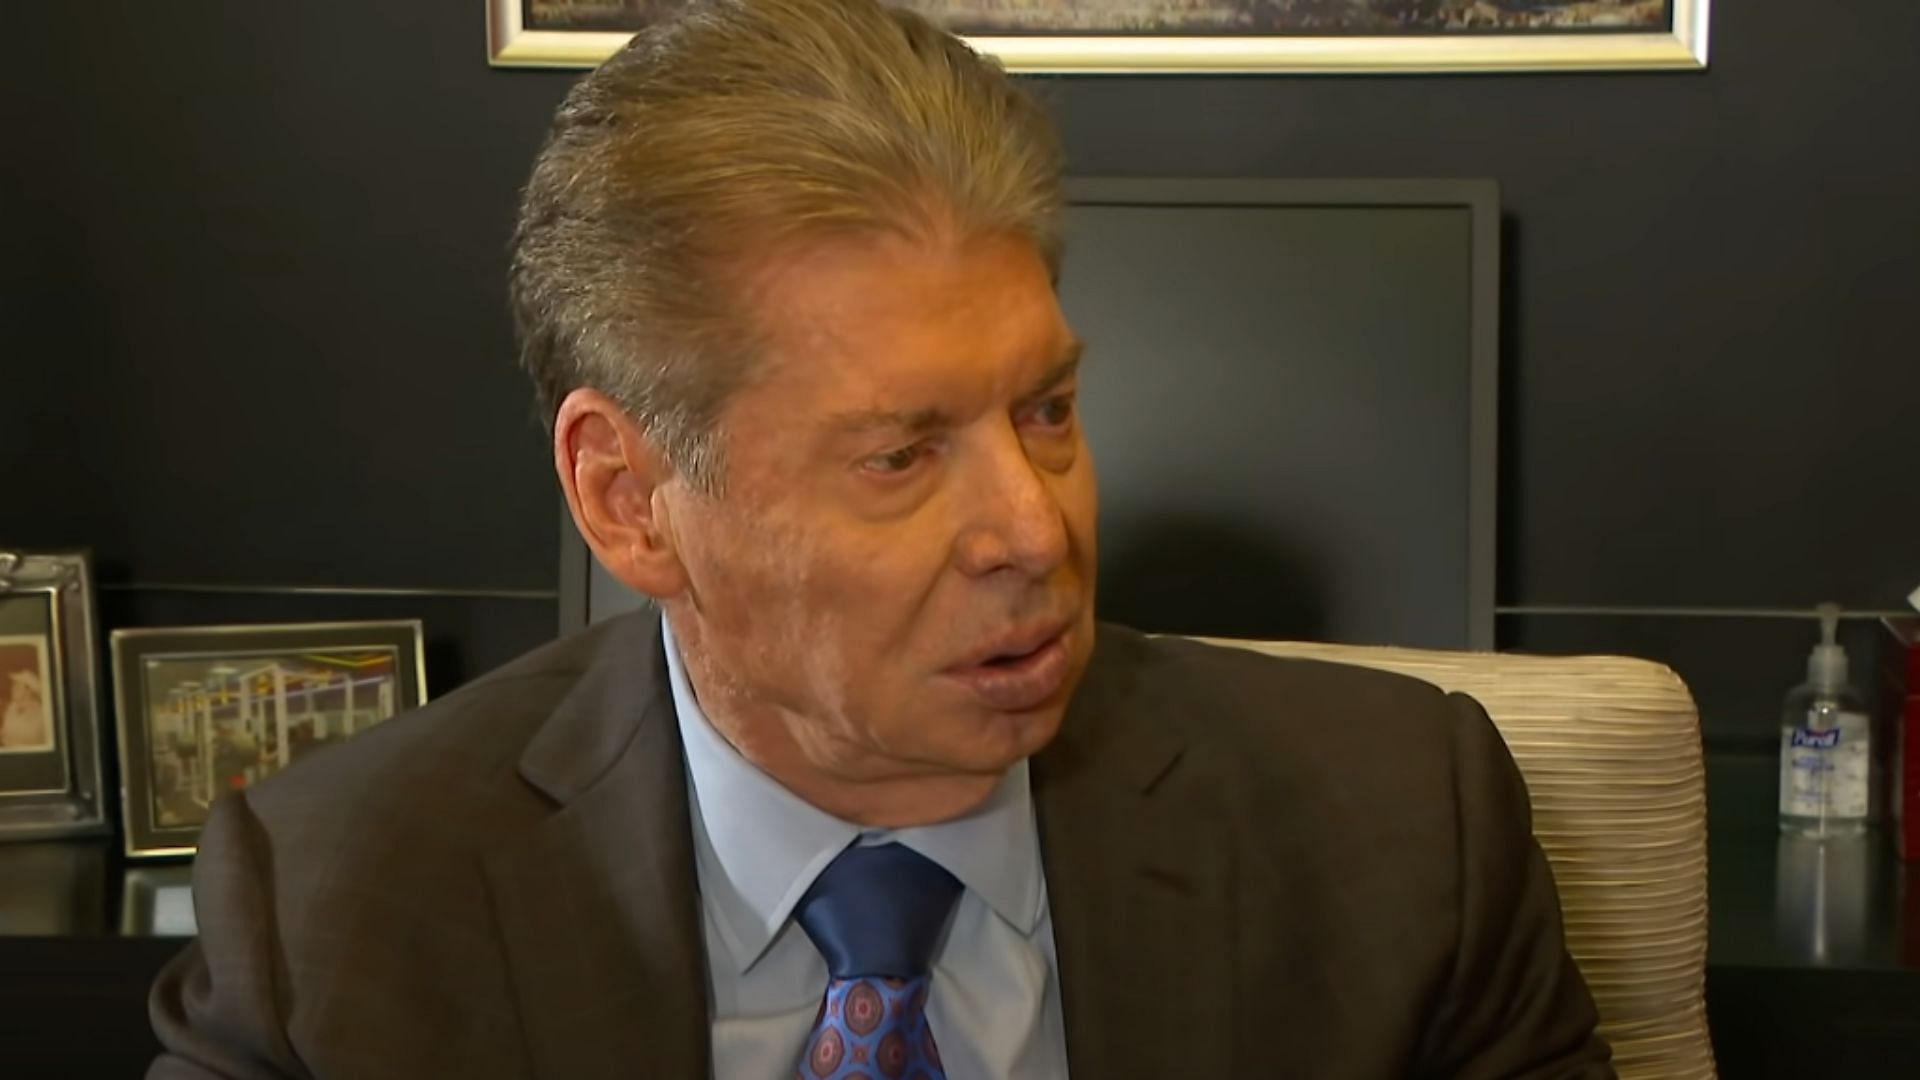 Vince McMahon wanted a top star to rehearse before a huge match